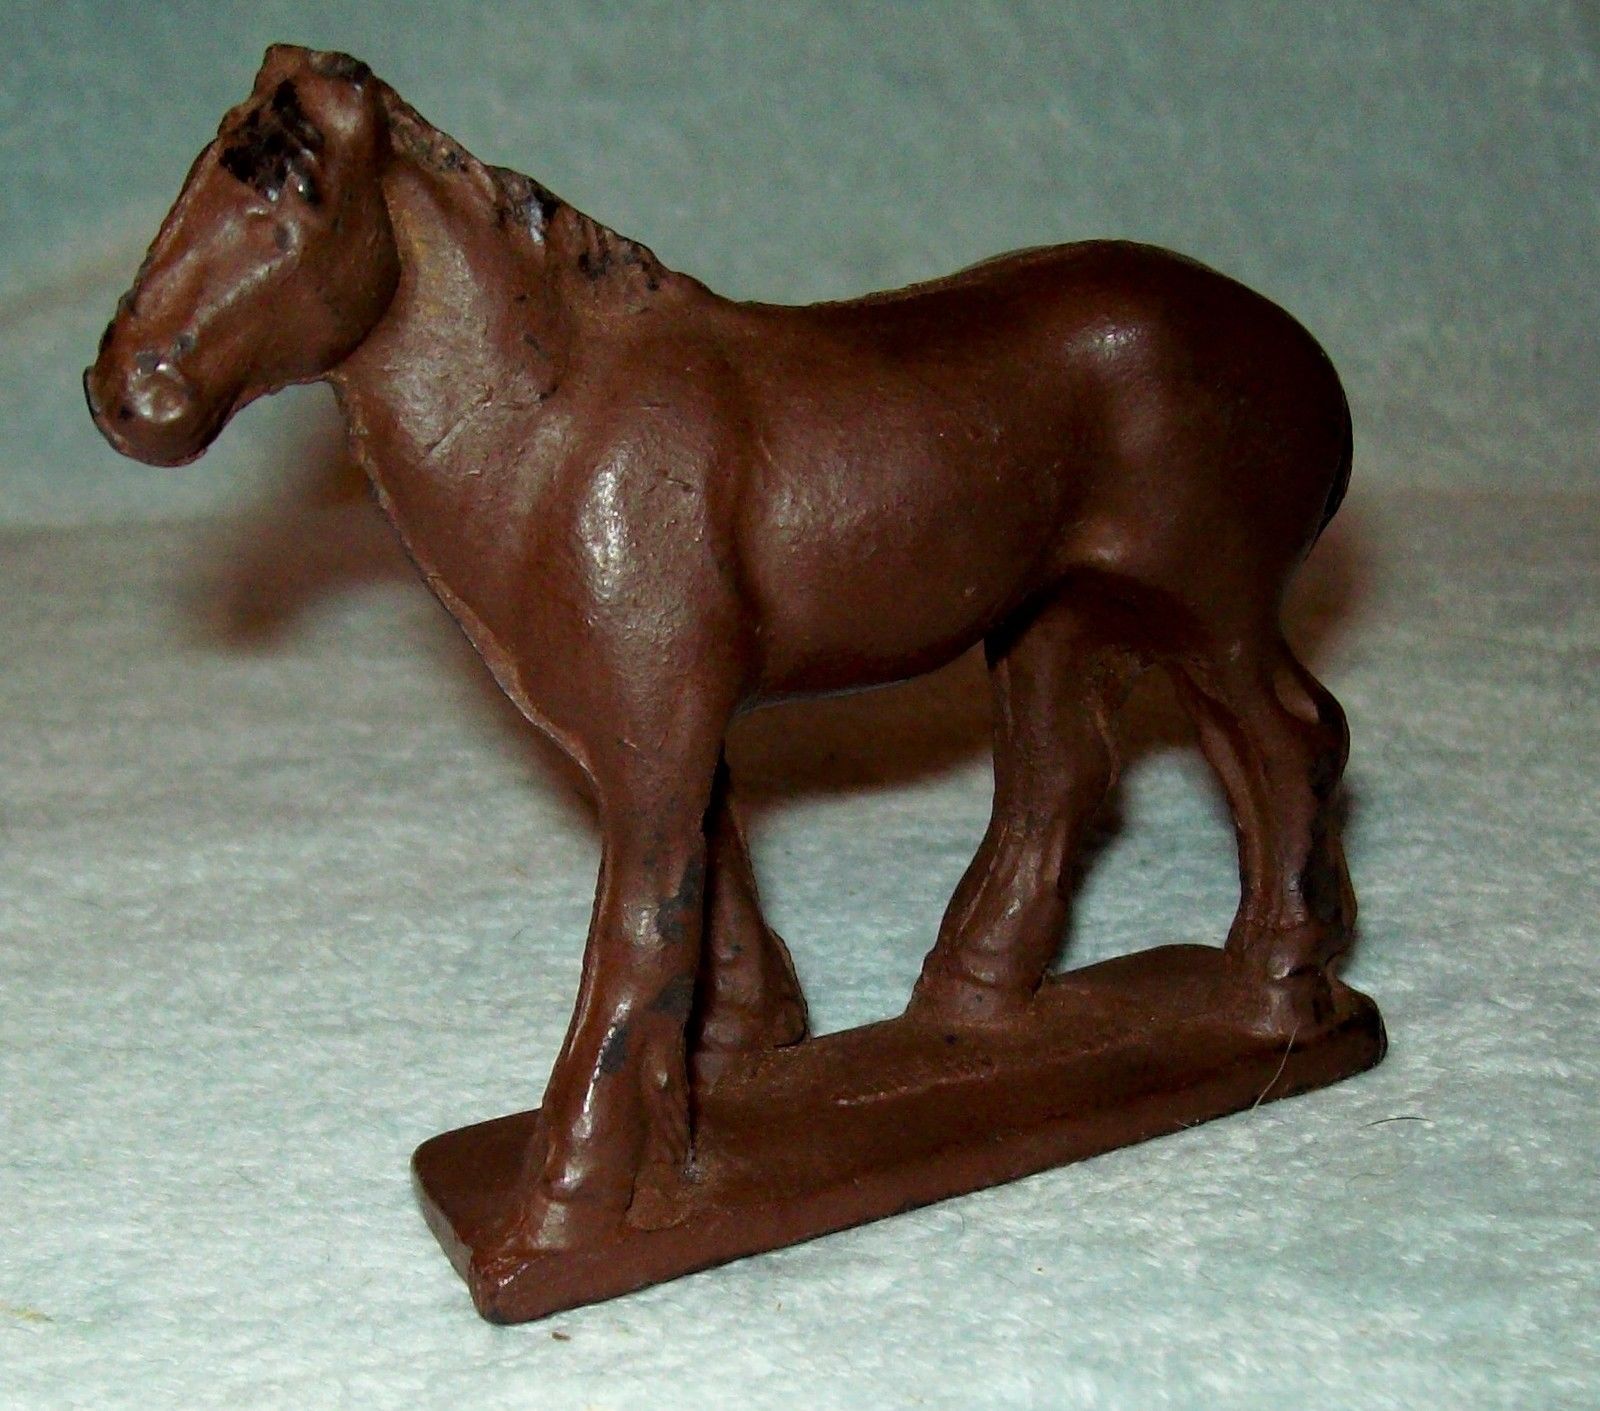 Auburn Rubber Draft Horse Vintage made In IN USA AUB RUBR  4" Long 3 1/2" Tall - $5.00